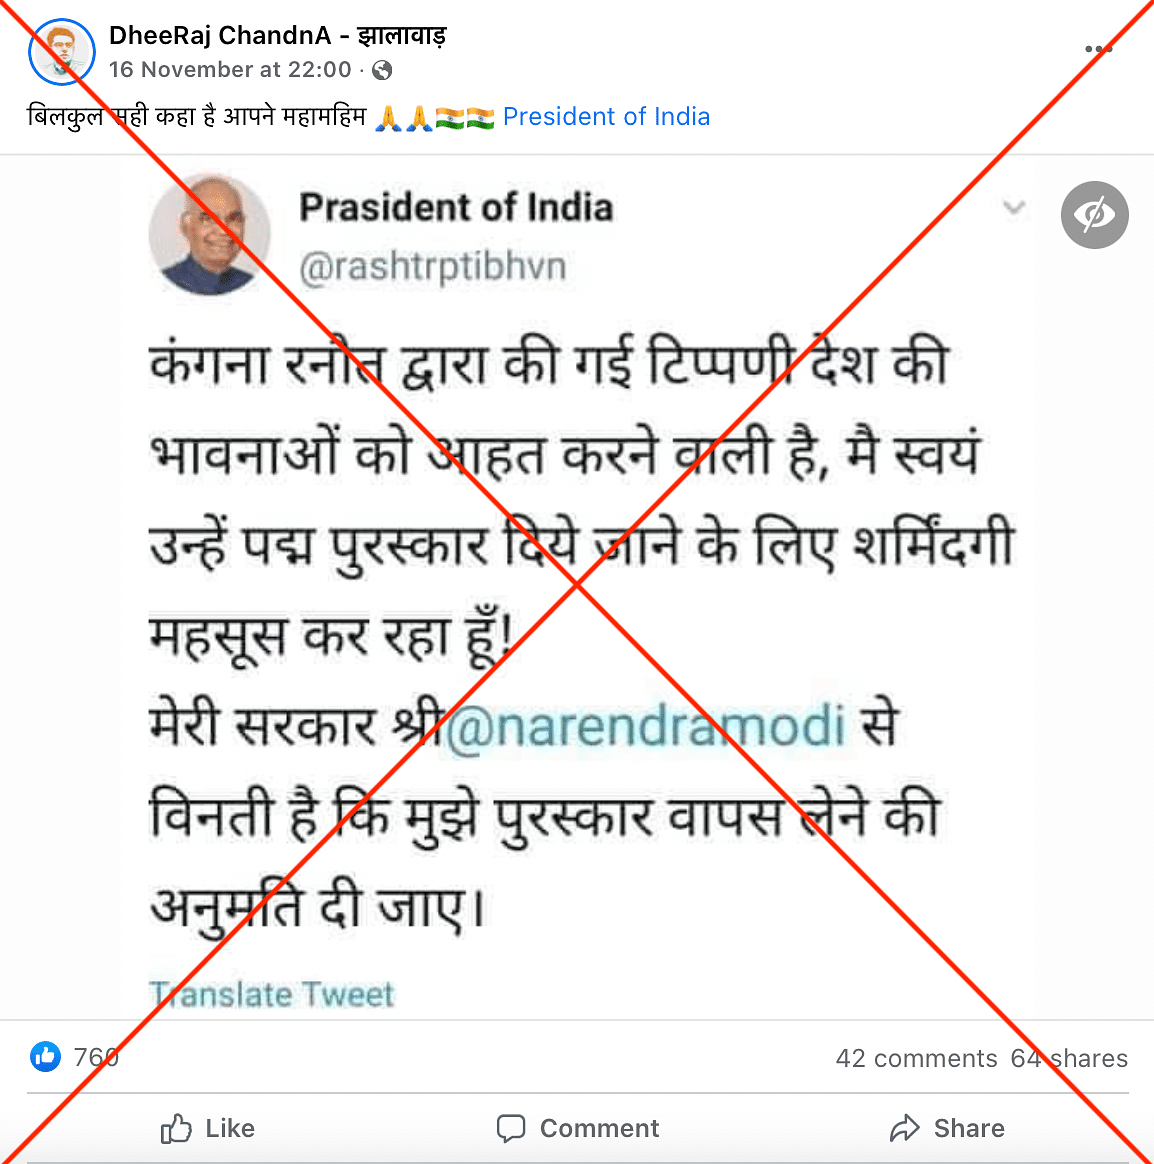 The tweet was shared by a fake account impersonating President Kovind and has now been suspended from Twitter. 